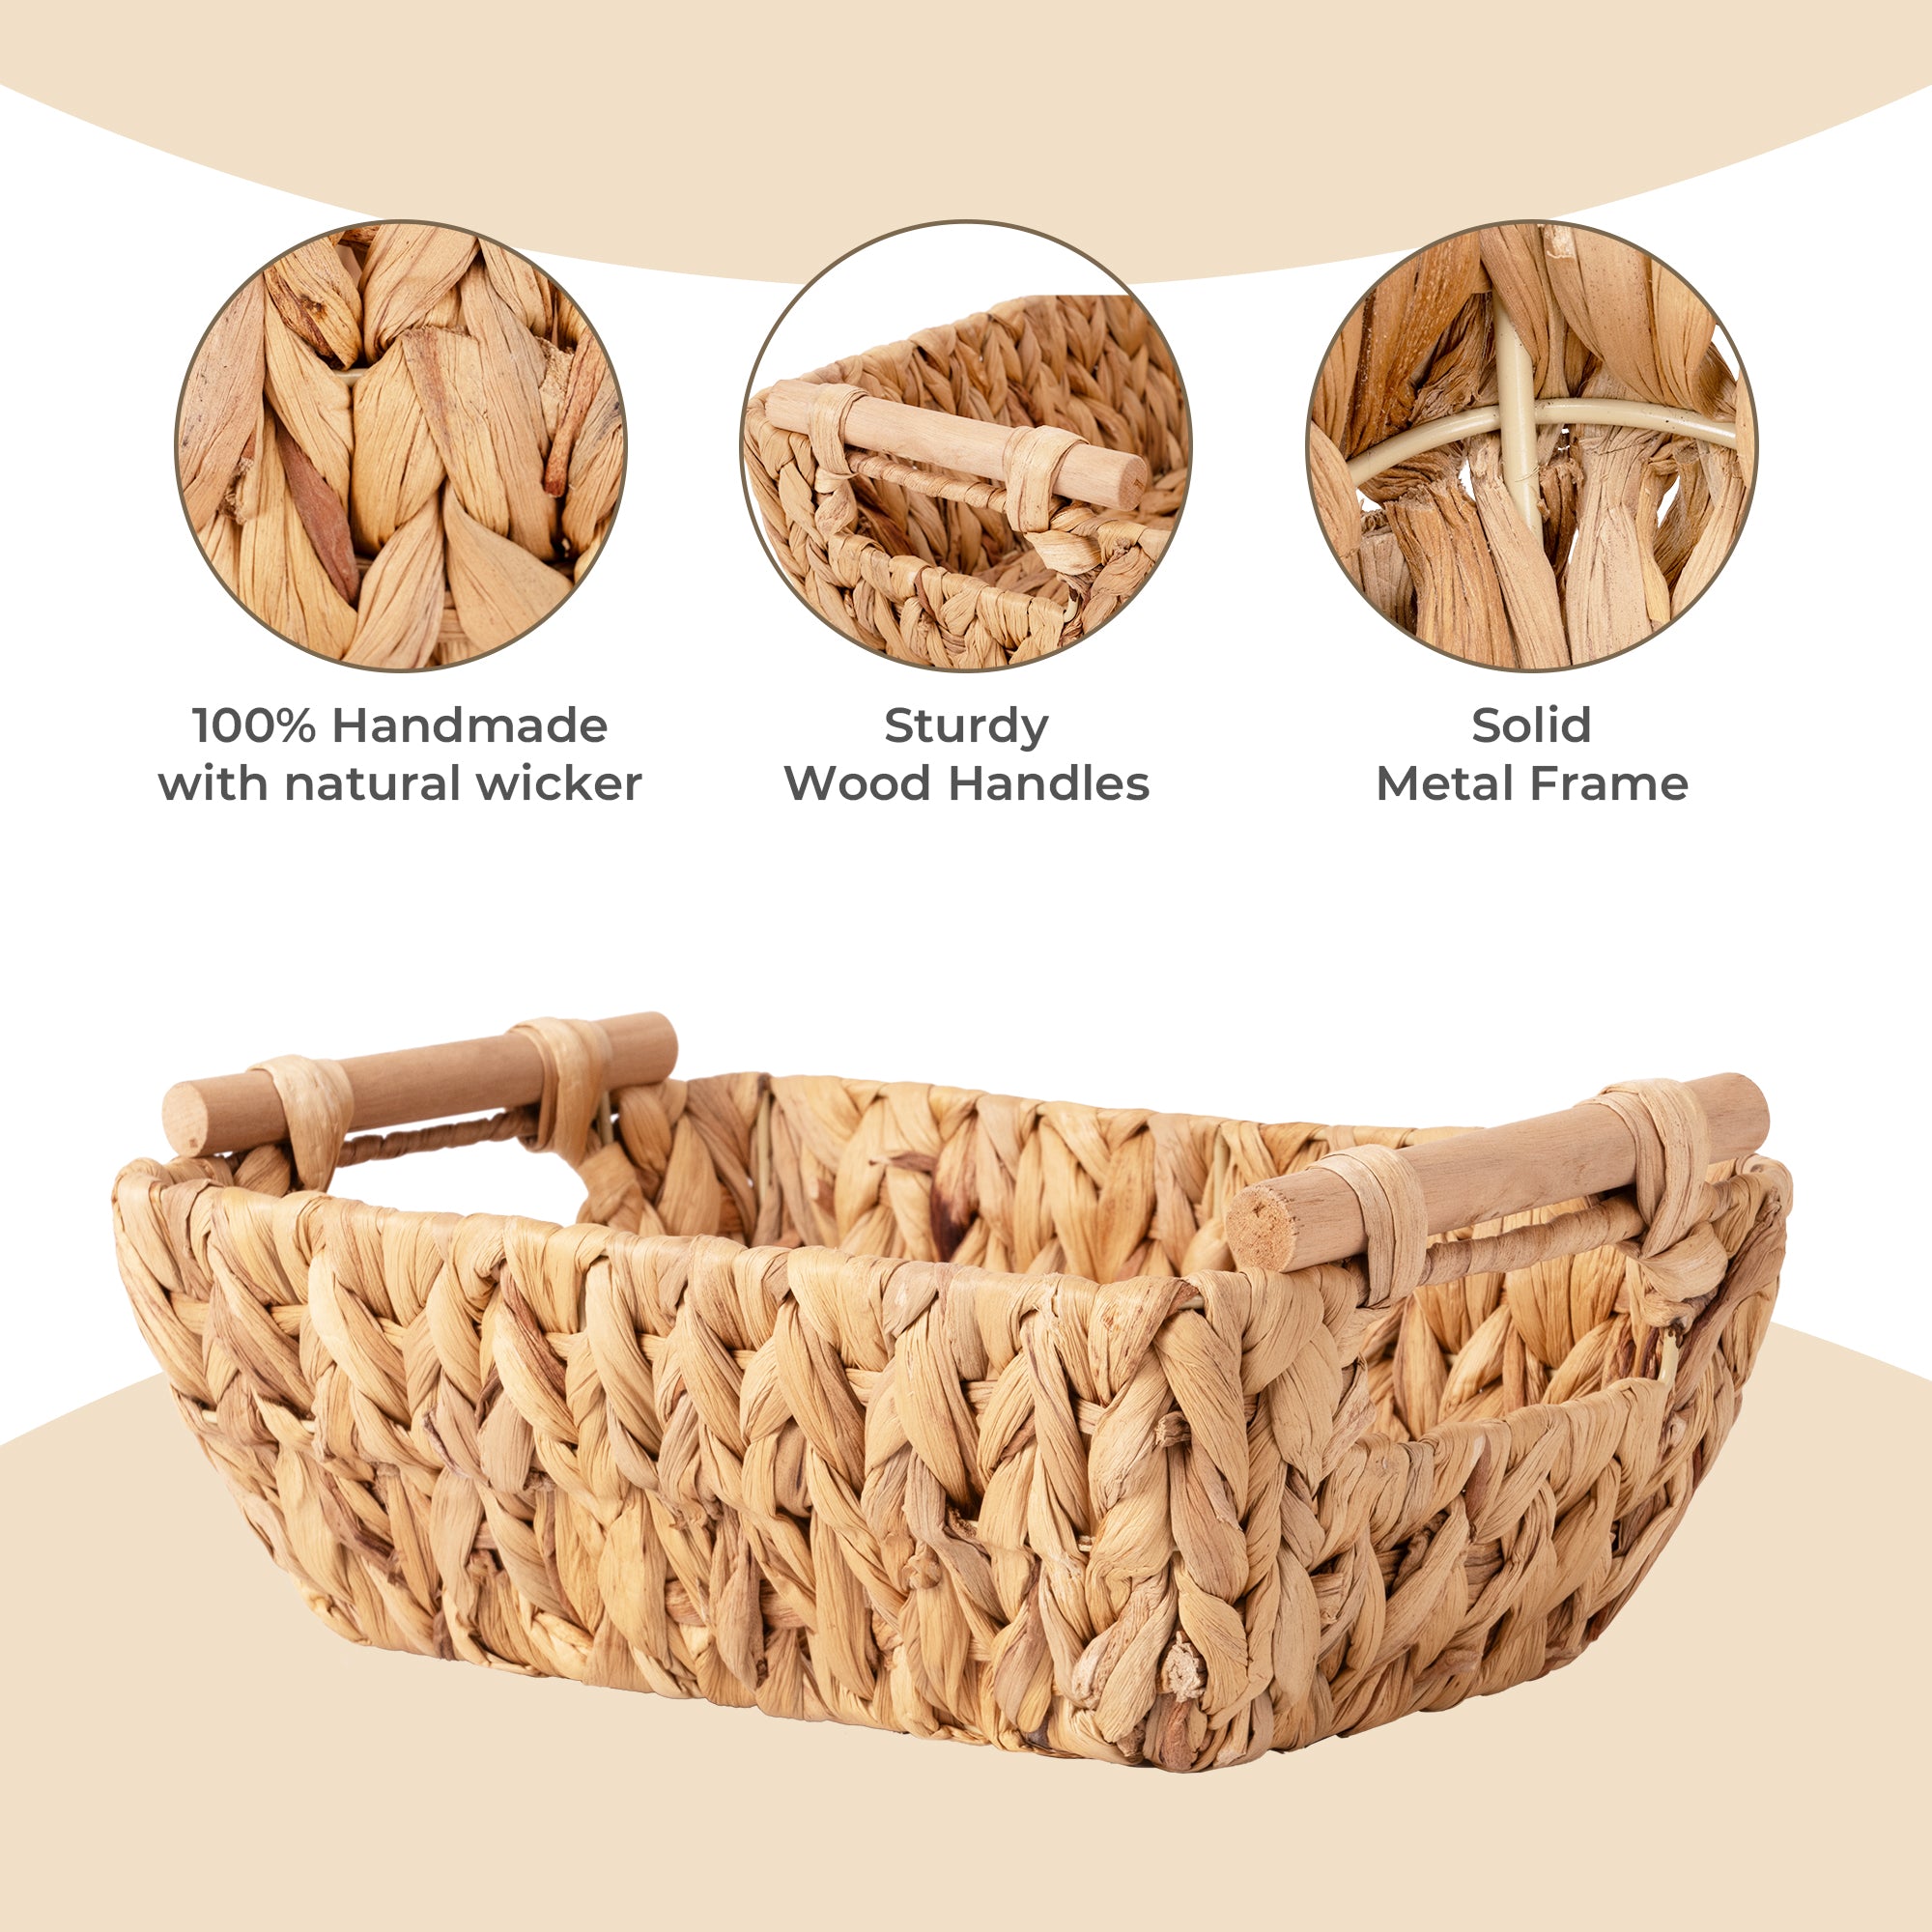 Hand-Woven Small Wicker Baskets with Wooden Handles, 2-pack